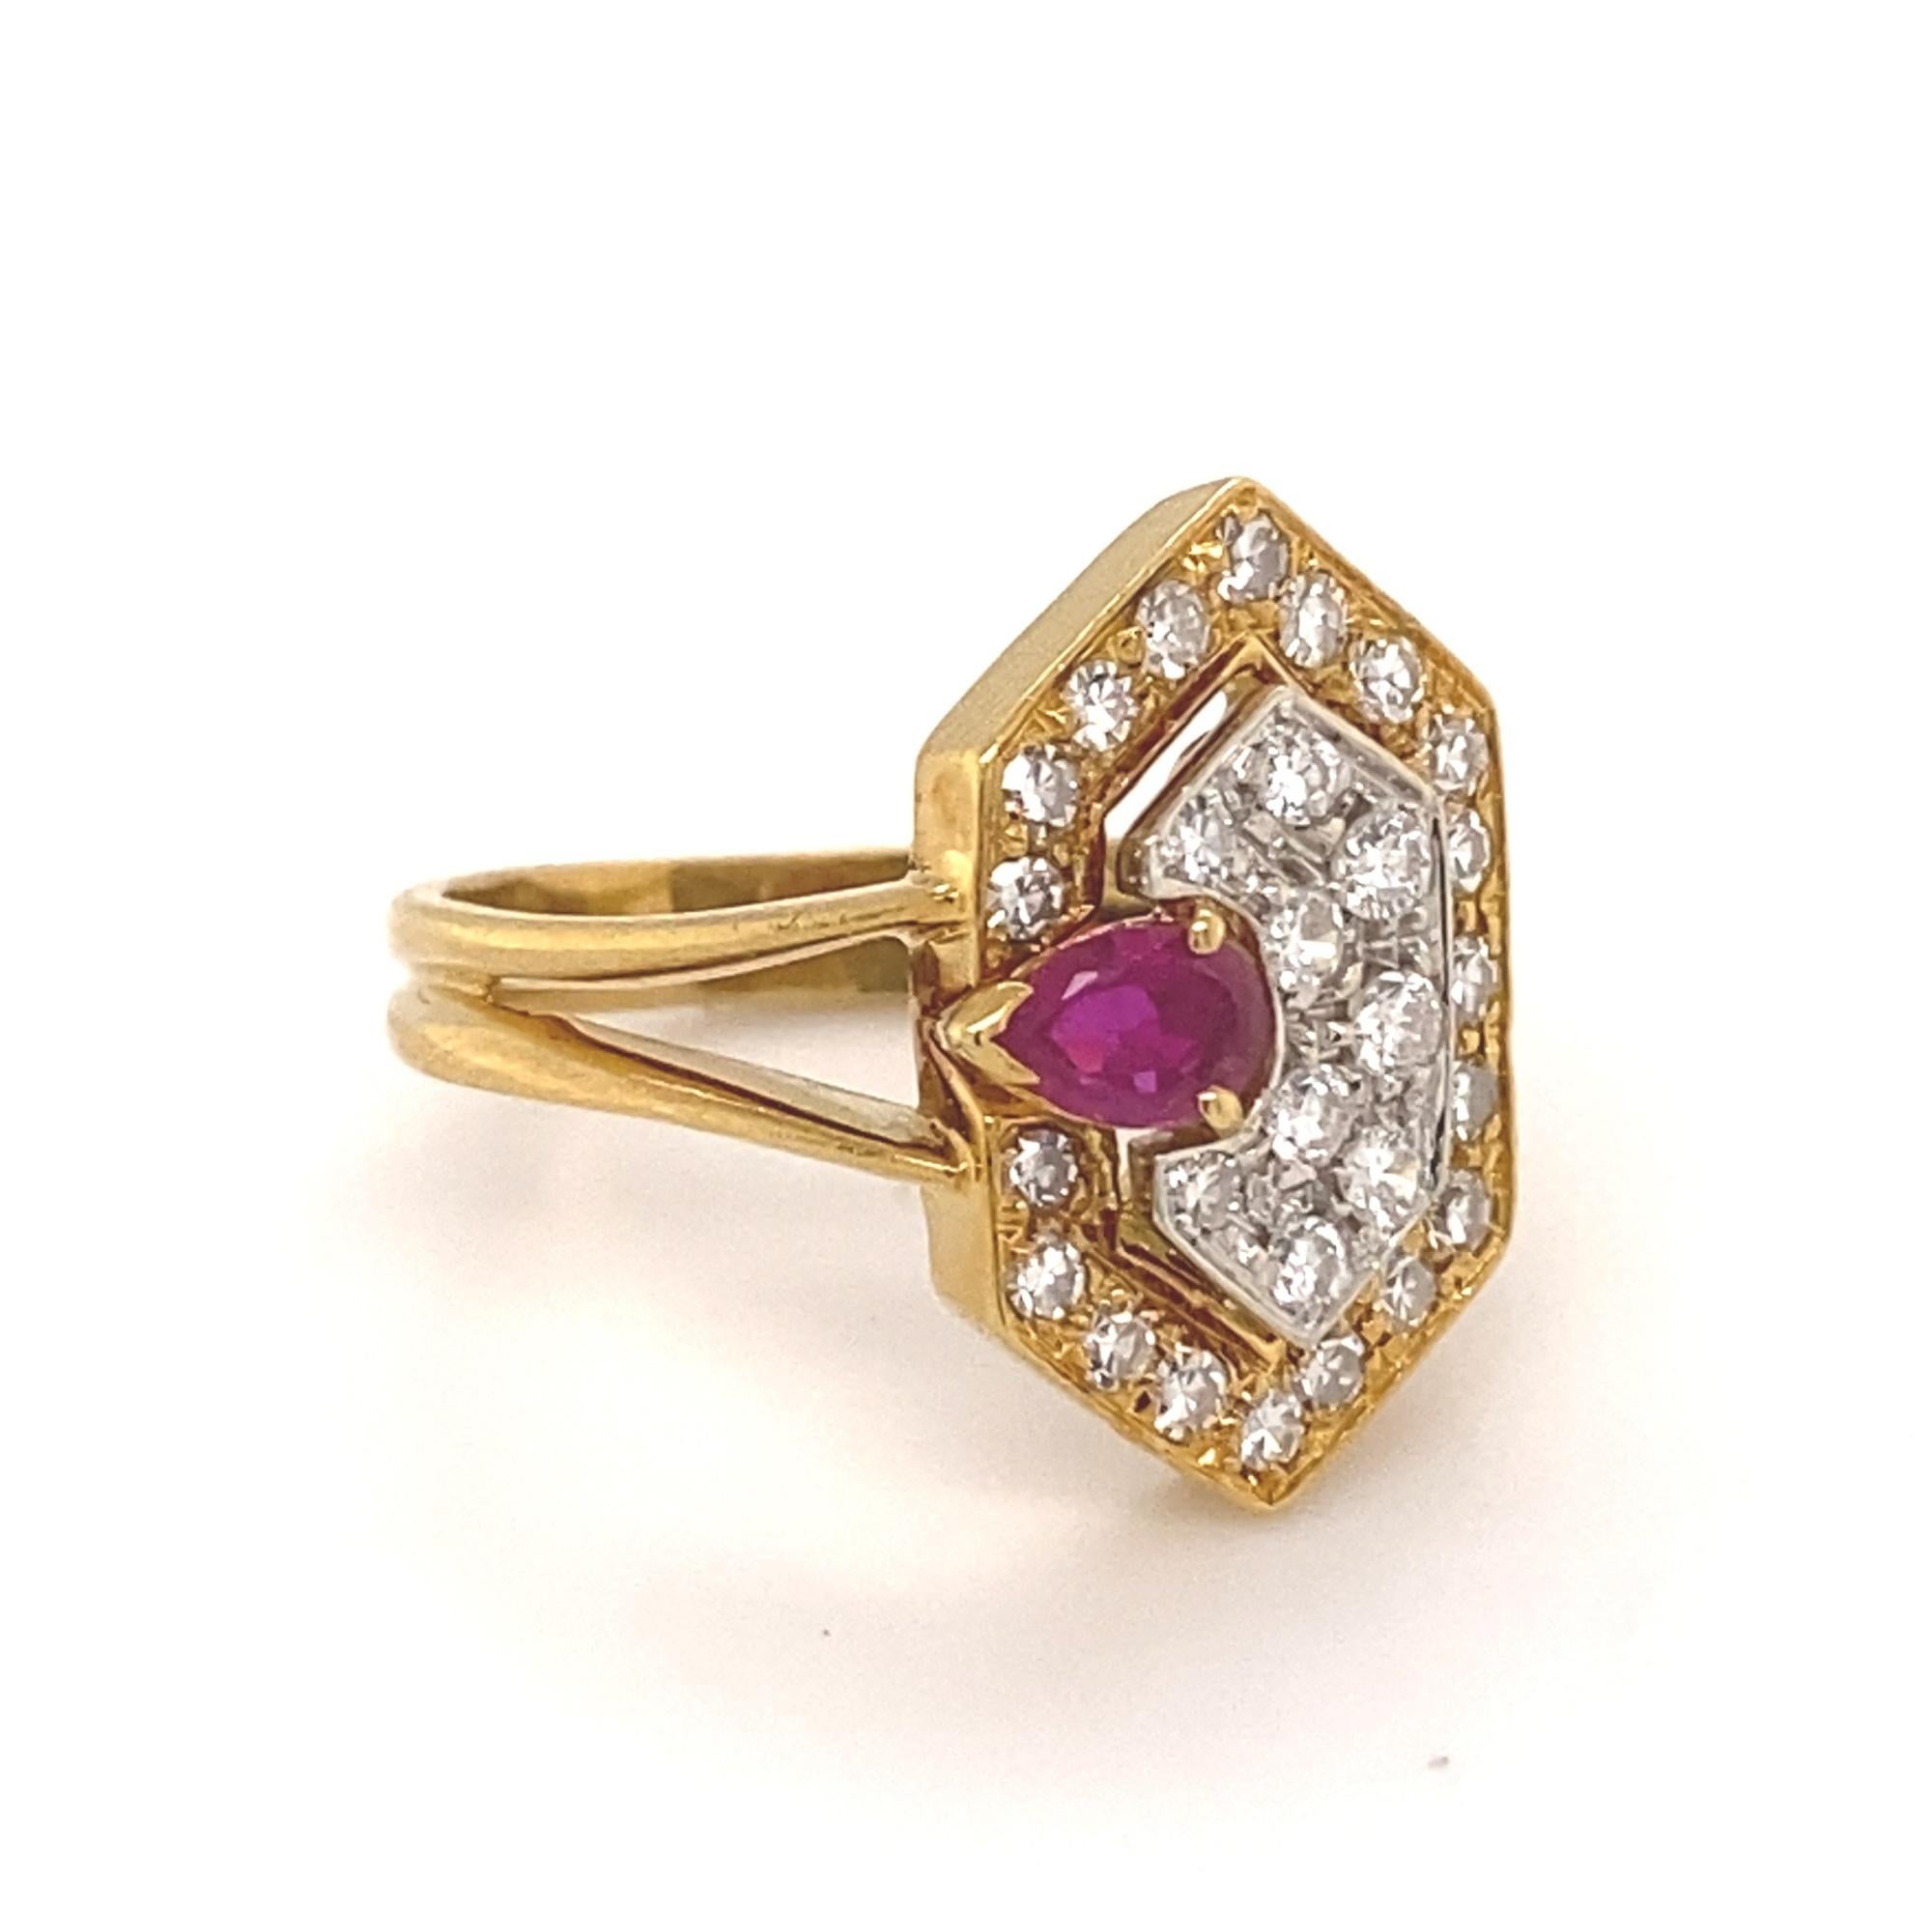 This is a beautiful Italian designer ring by Faraone Menella. The ring is set with diamonds and a ruby in 18K yellow and white gold. The 29 diamonds are white H-I color VS-2 clarity total weight .58 carats. The ruby is natural pear shaped with nice